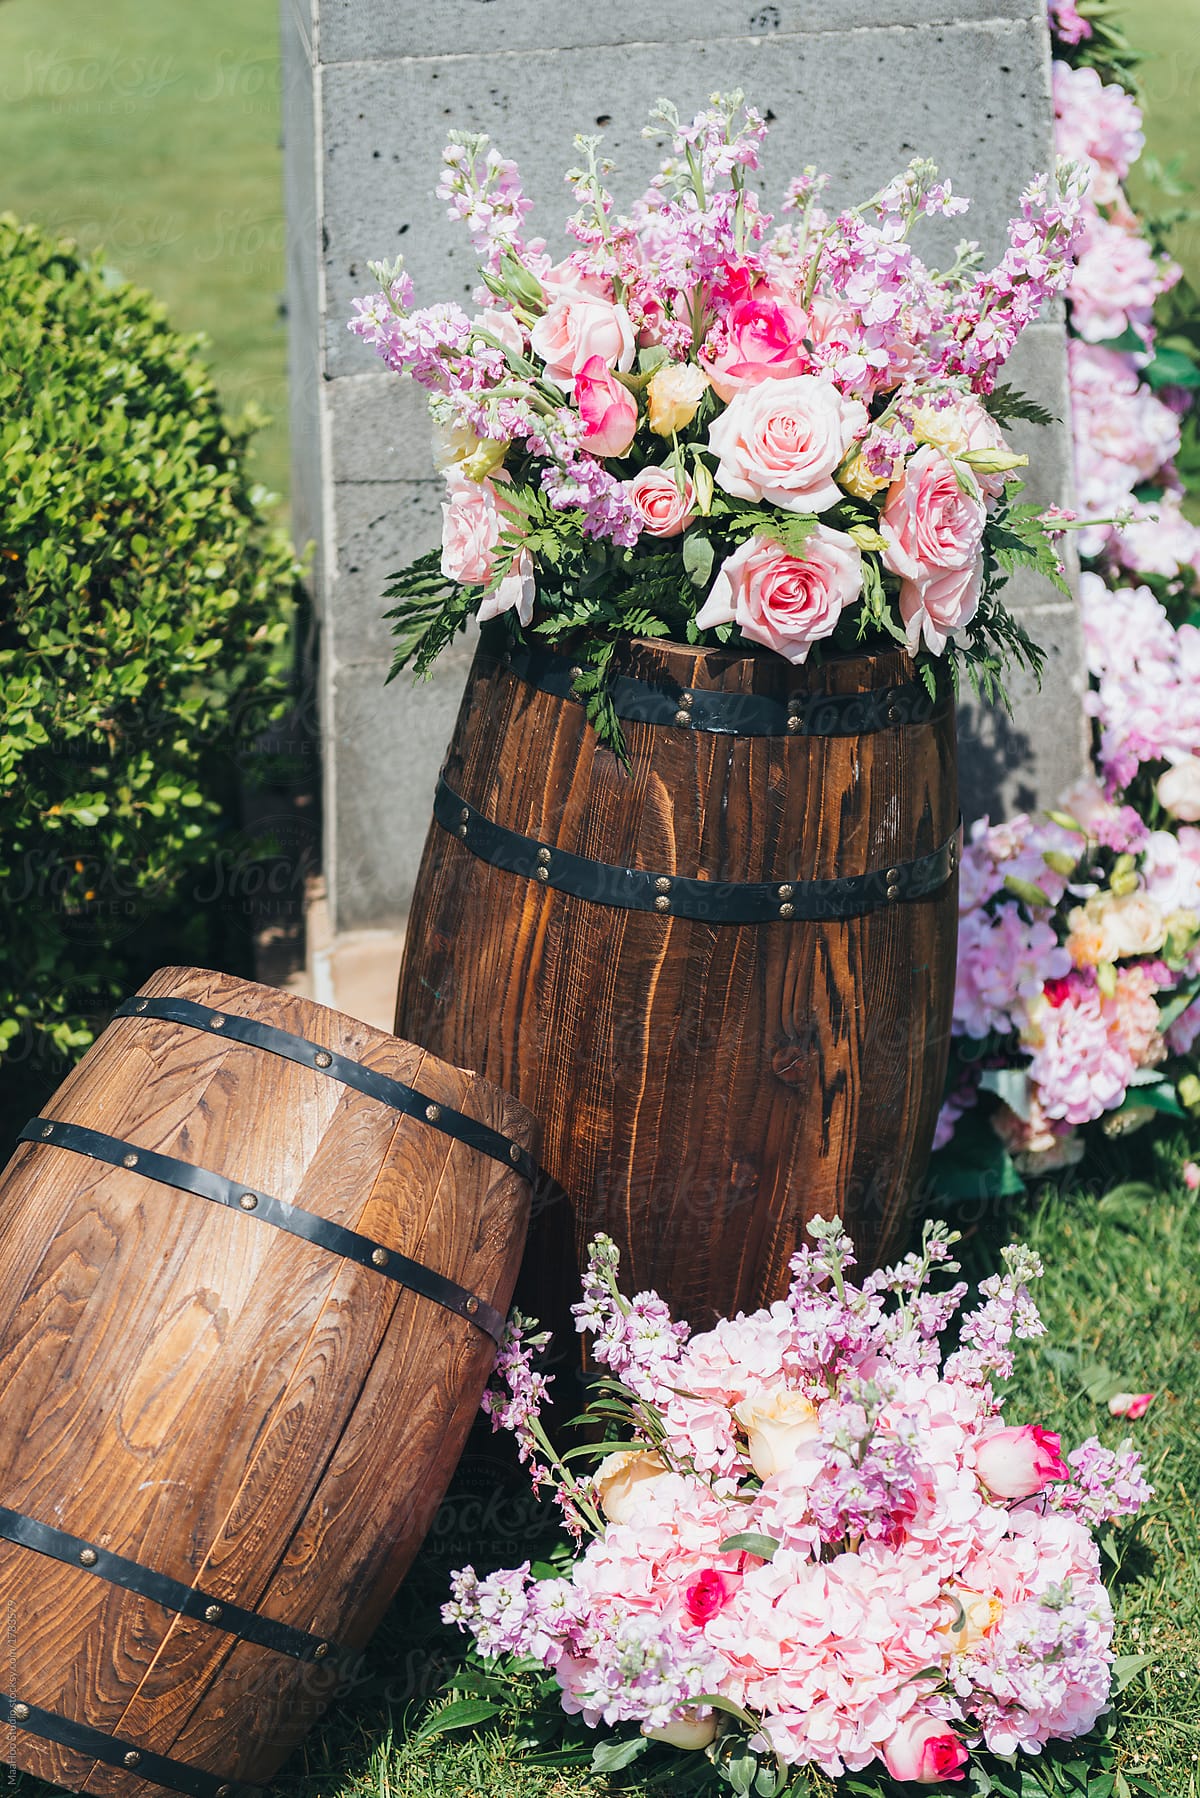 Flowers in a outdoors wedding